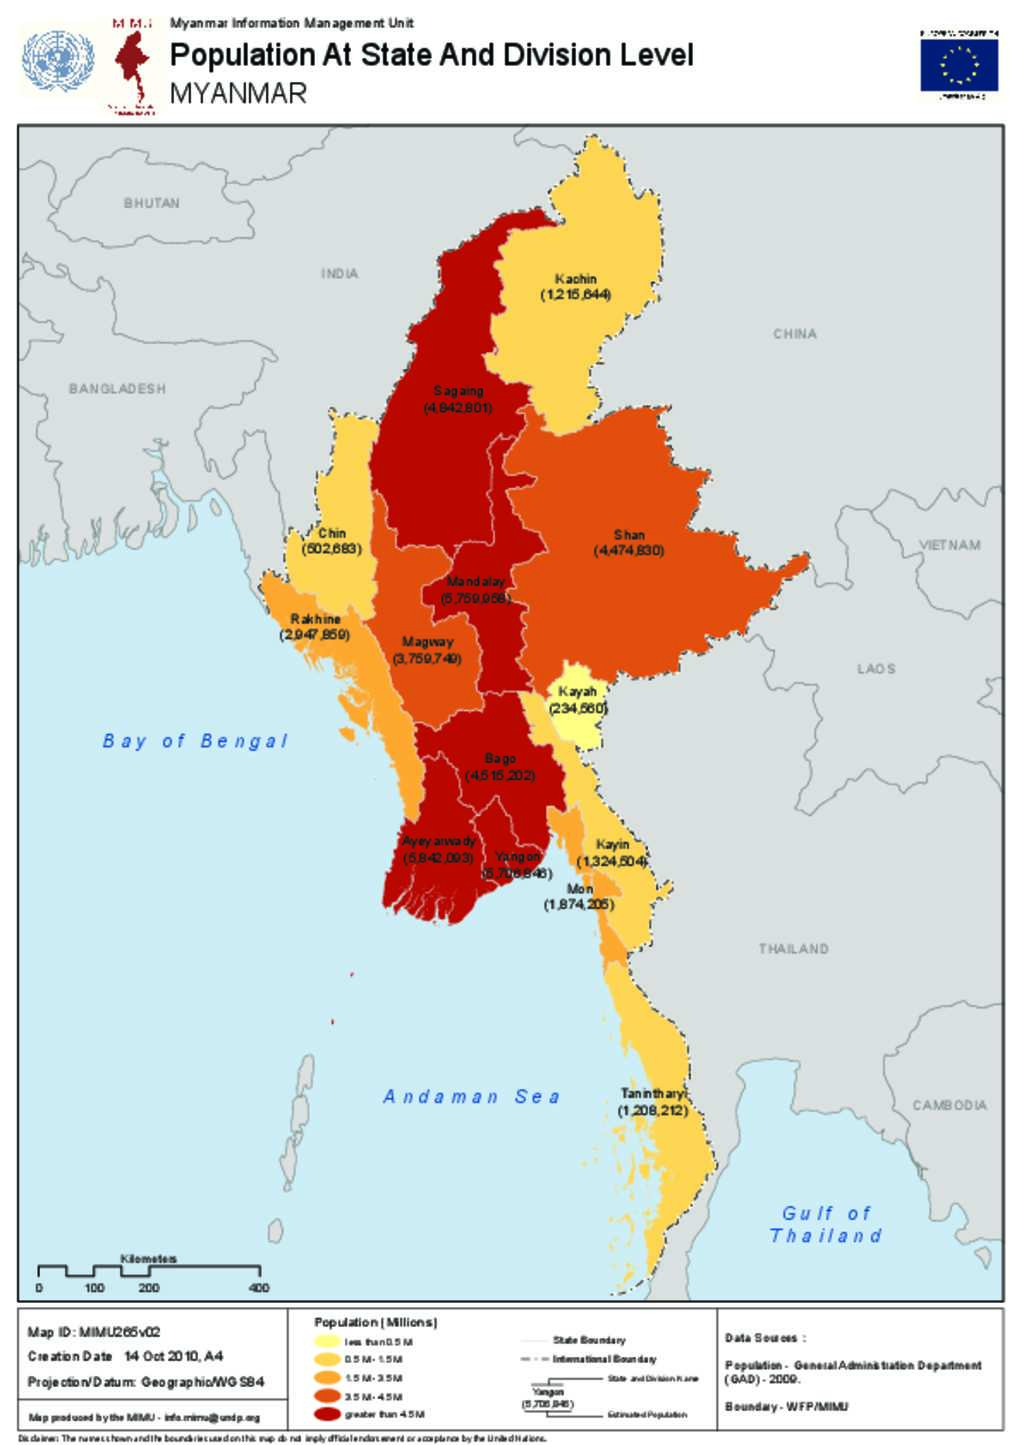 Document Administrative Map Myanmar Population at State and